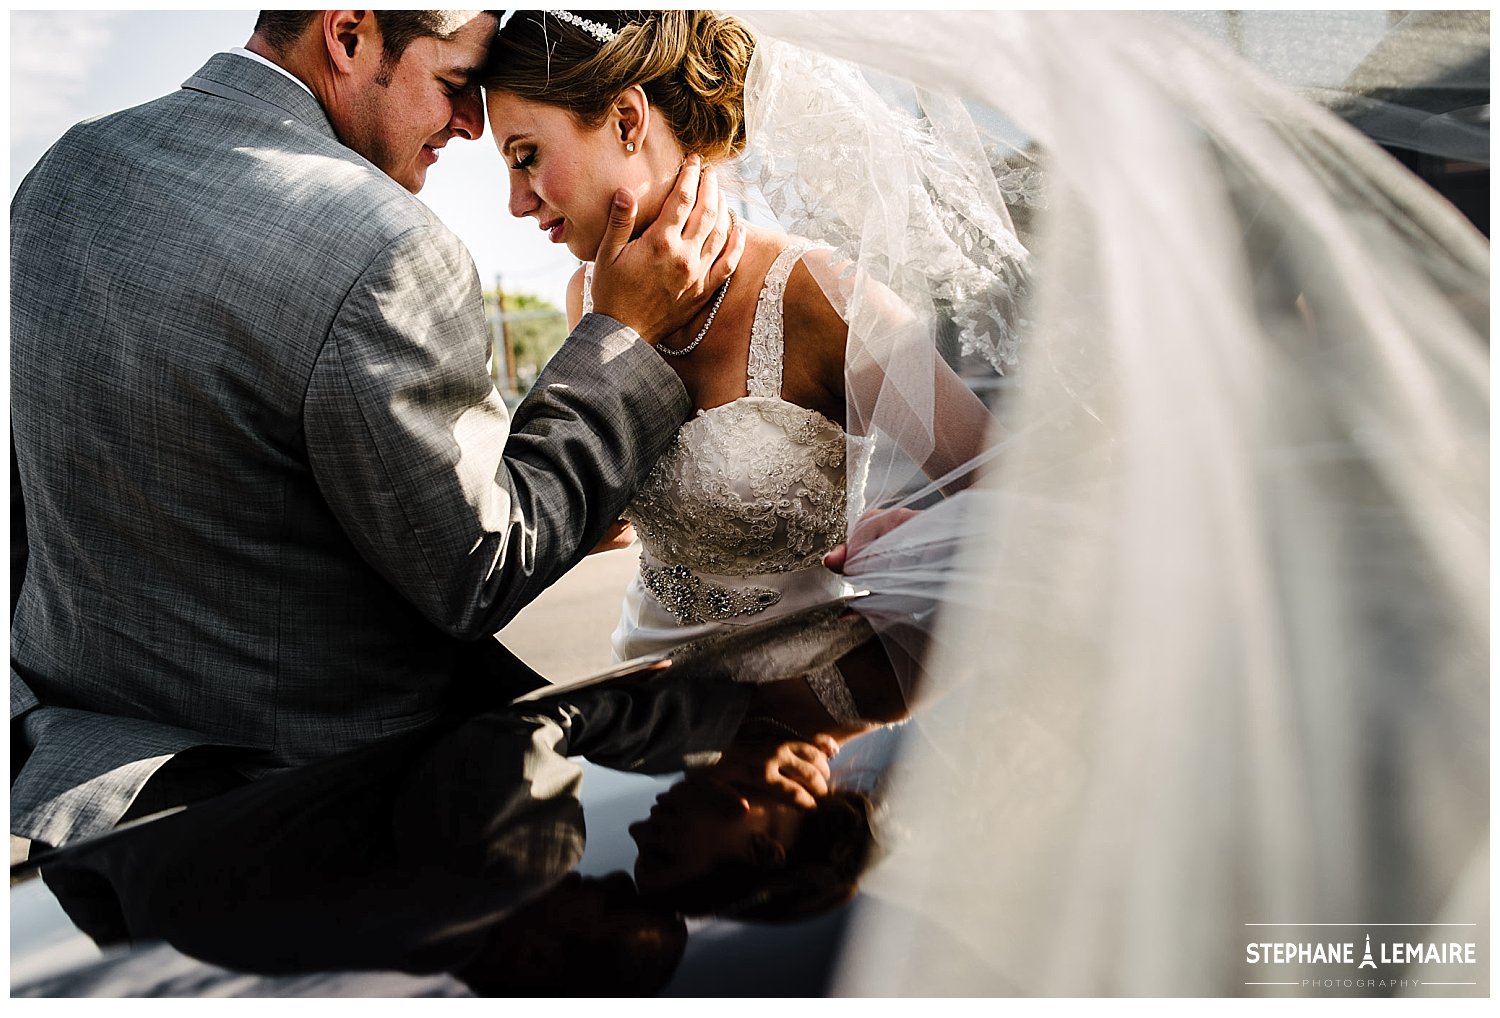 Bride and groom hugging next to vintage car with veil blowing in the wind.